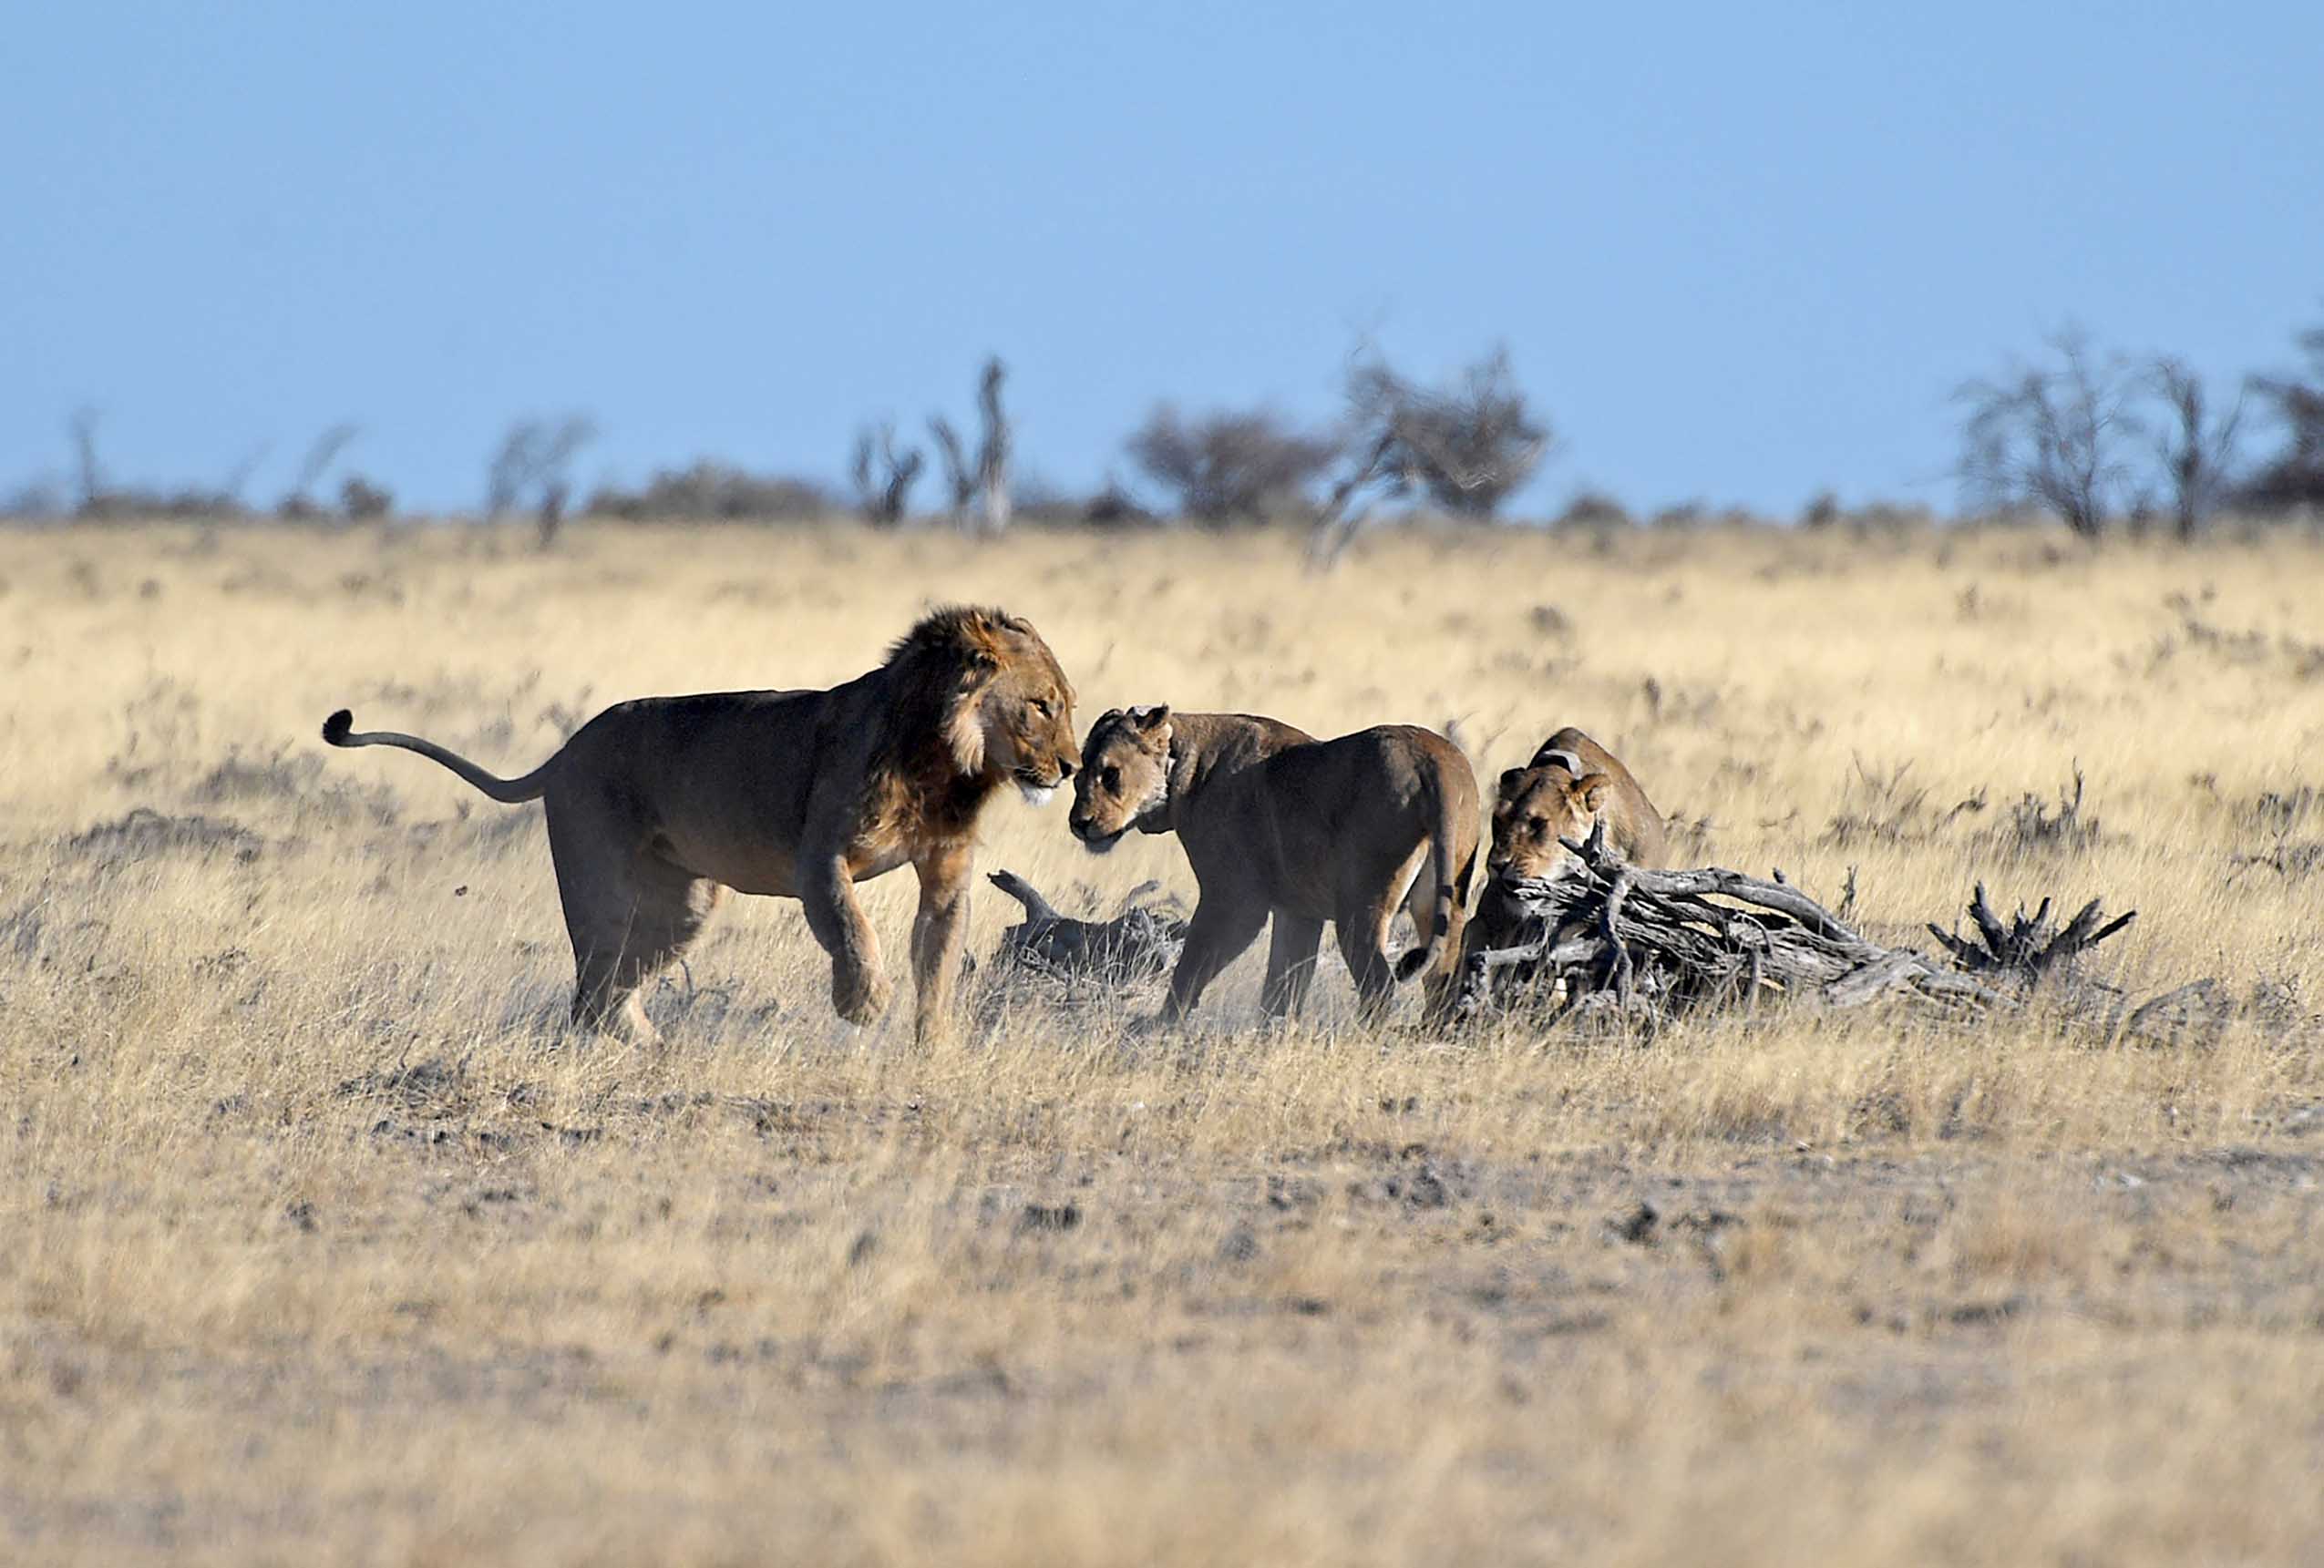  Lions are pictured at the Etosha National Park in northern Namibia, Aug. 15, 2022. The Namibian government is taking a proactive stance to protect and sustain its dwindling lion population in the northwestern part of the country, an official said on Monday. (Xinhua/Chen Cheng)